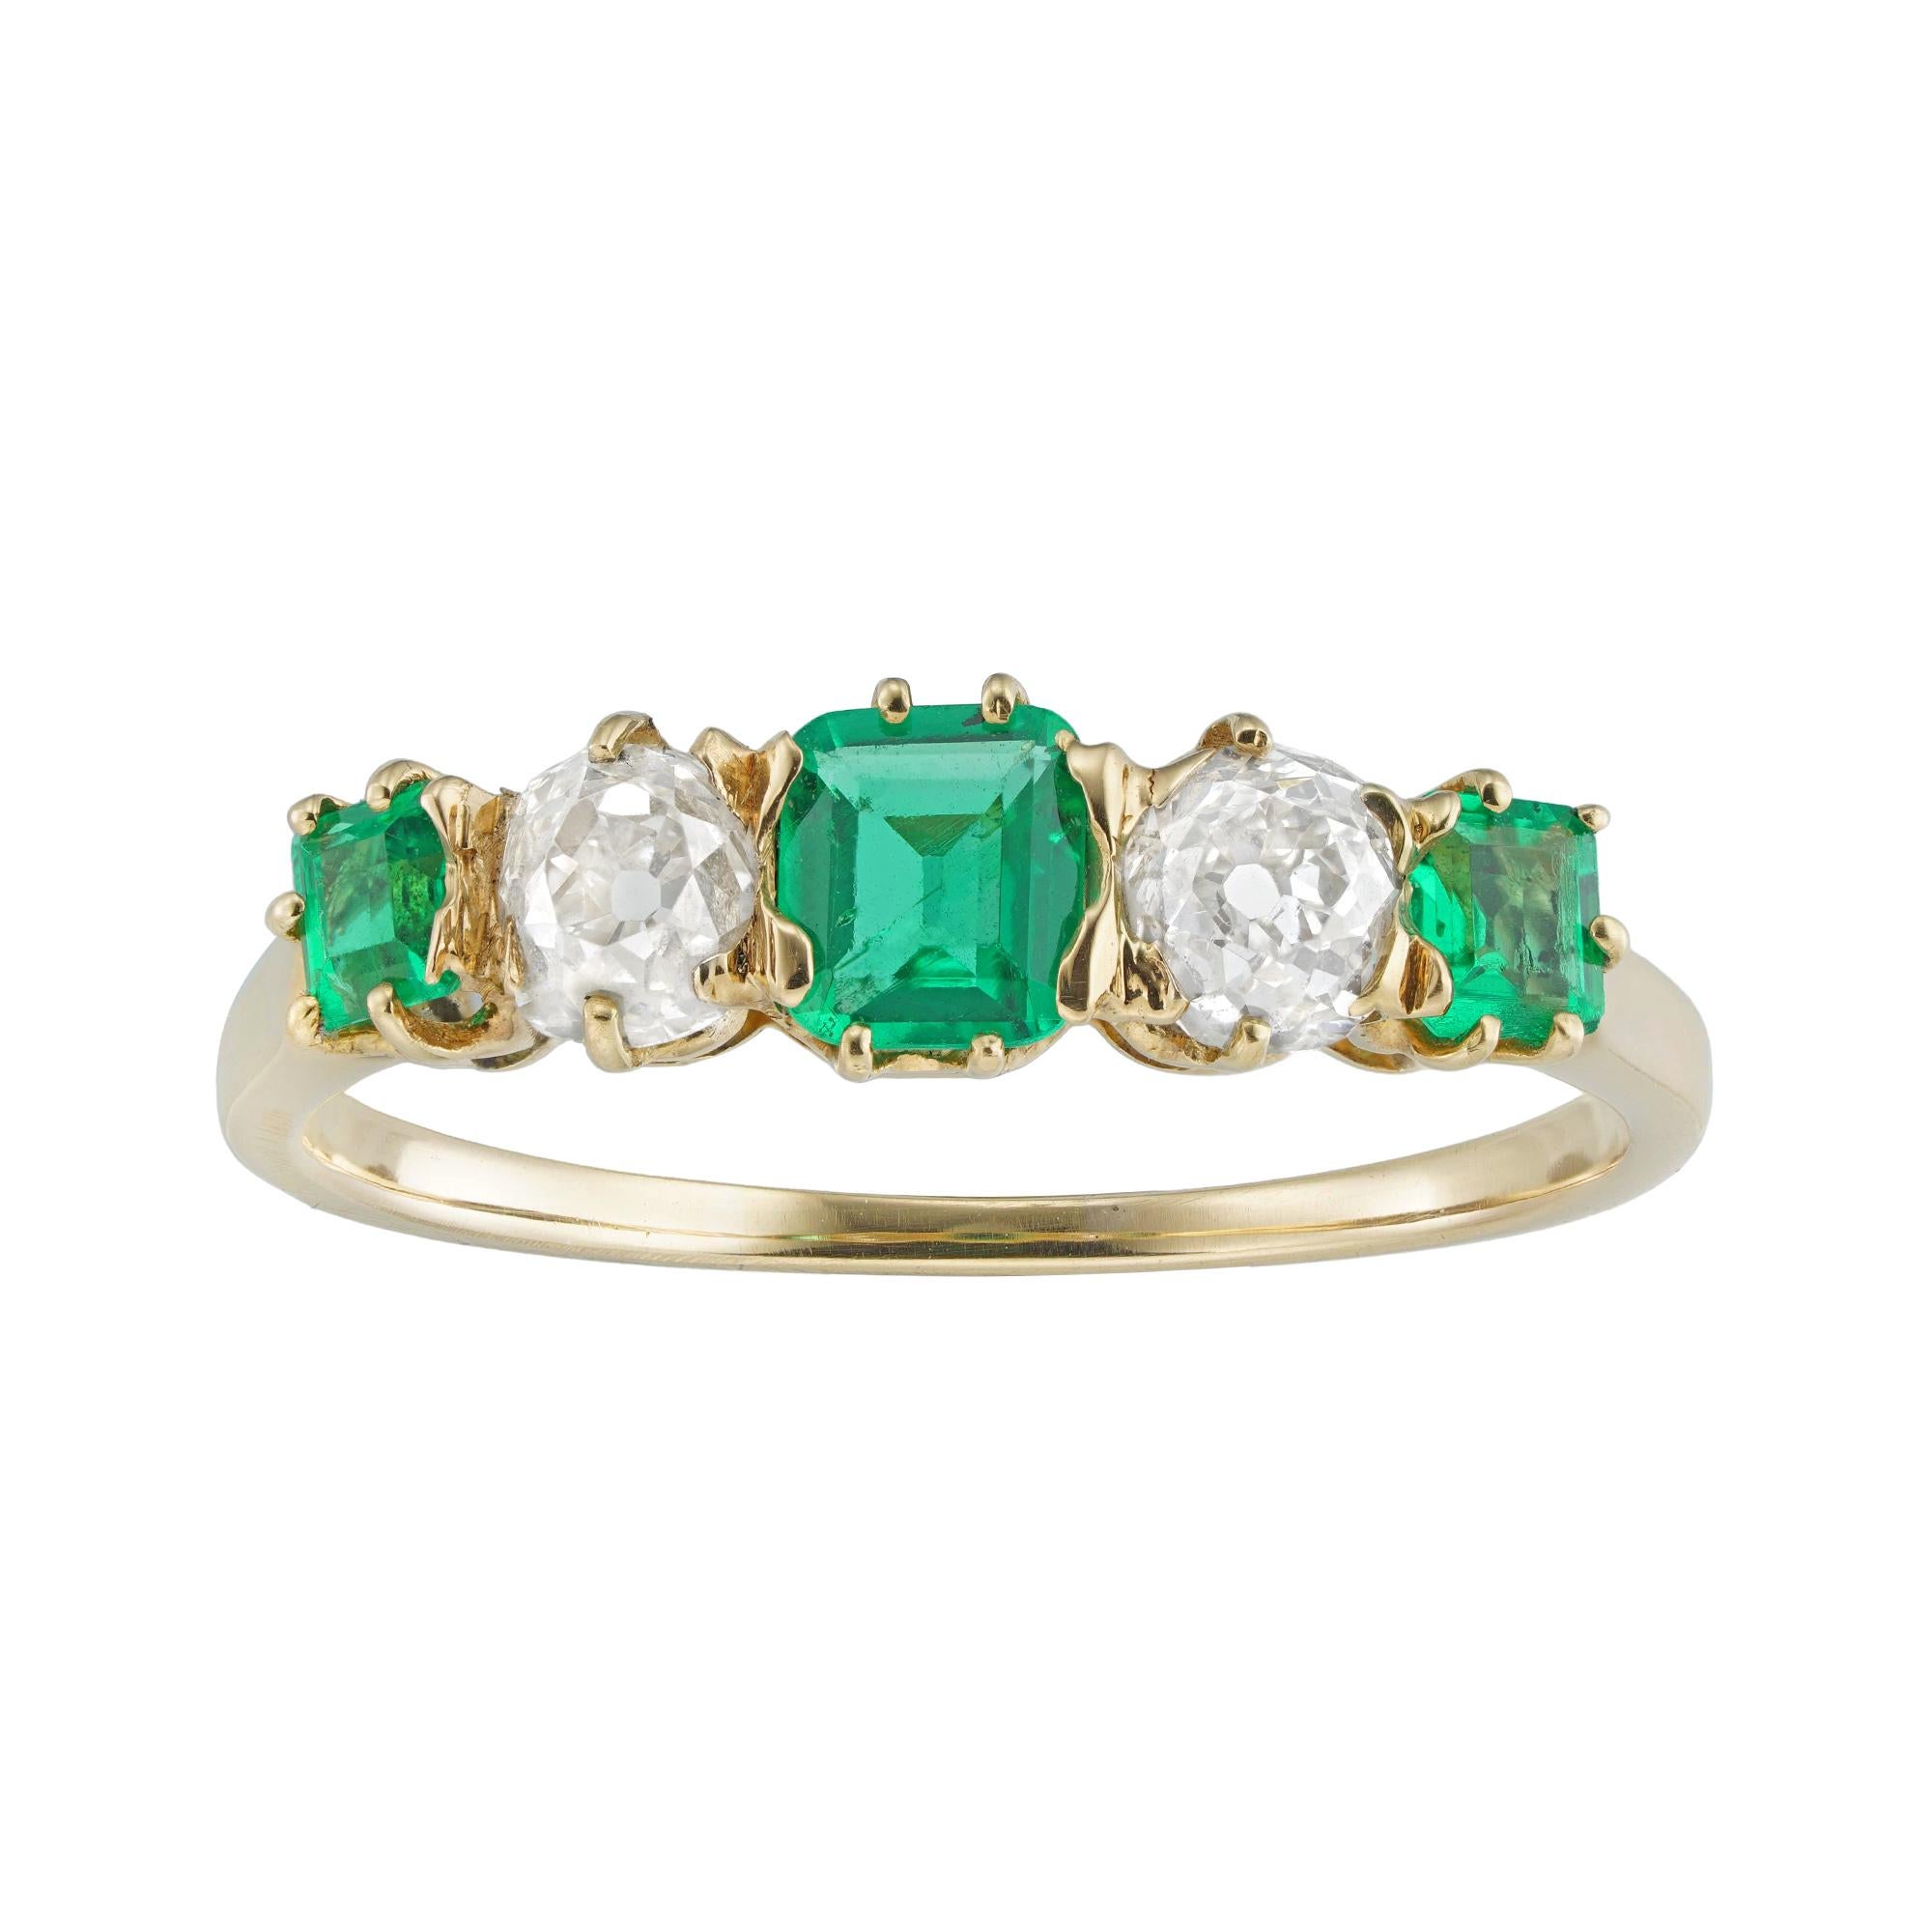 An Edwardian emerald and diamond five-stone ring, the three octagonal-cut faceted emeralds estimated to weigh 0.35 carats in total, the two old European-cut diamonds estimated to weigh a further total of 0.4 carats, all claw-set in yellow gold